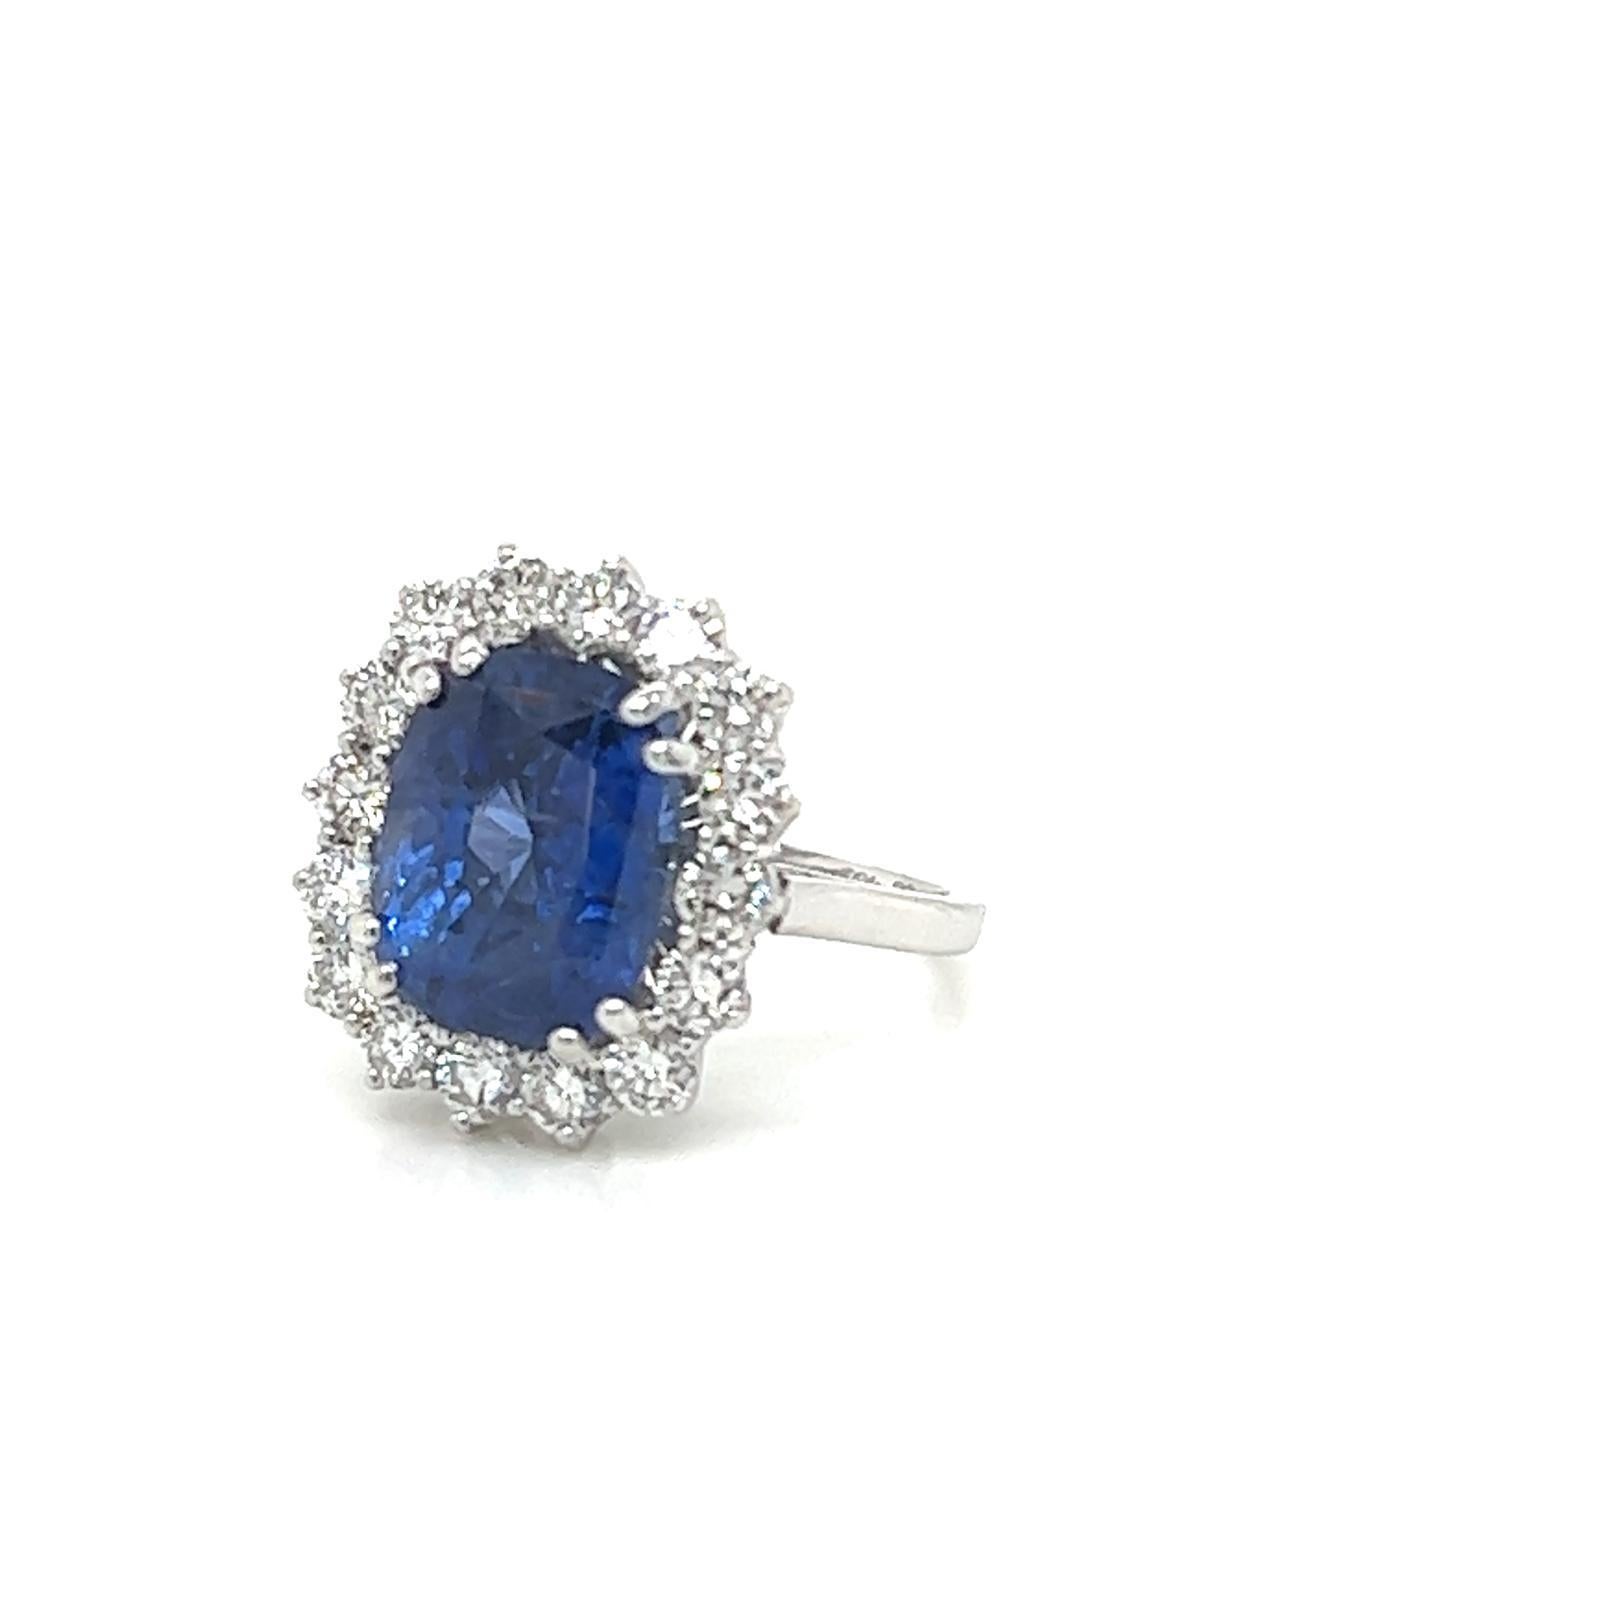 Art Deco GCS Certified 8.57 Carat Ceylon Sapphire and Diamond Ring in 18K White Gold For Sale